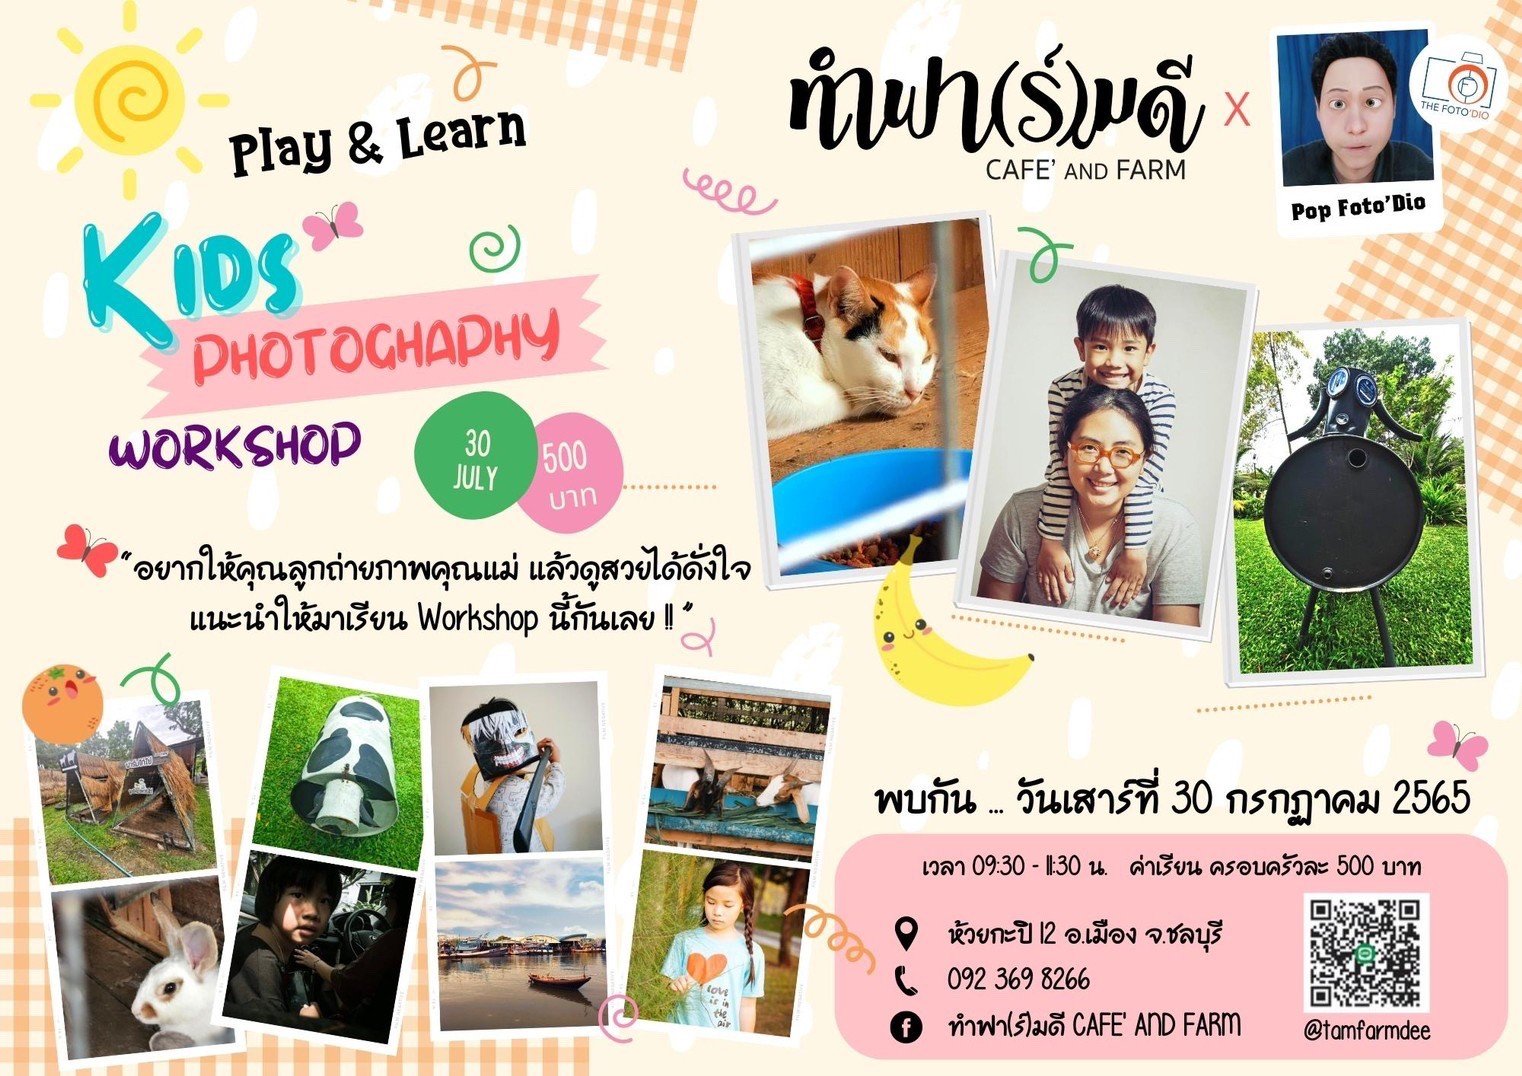 Learn & Play Kid Photography Workshop by Pop Foto'Dio